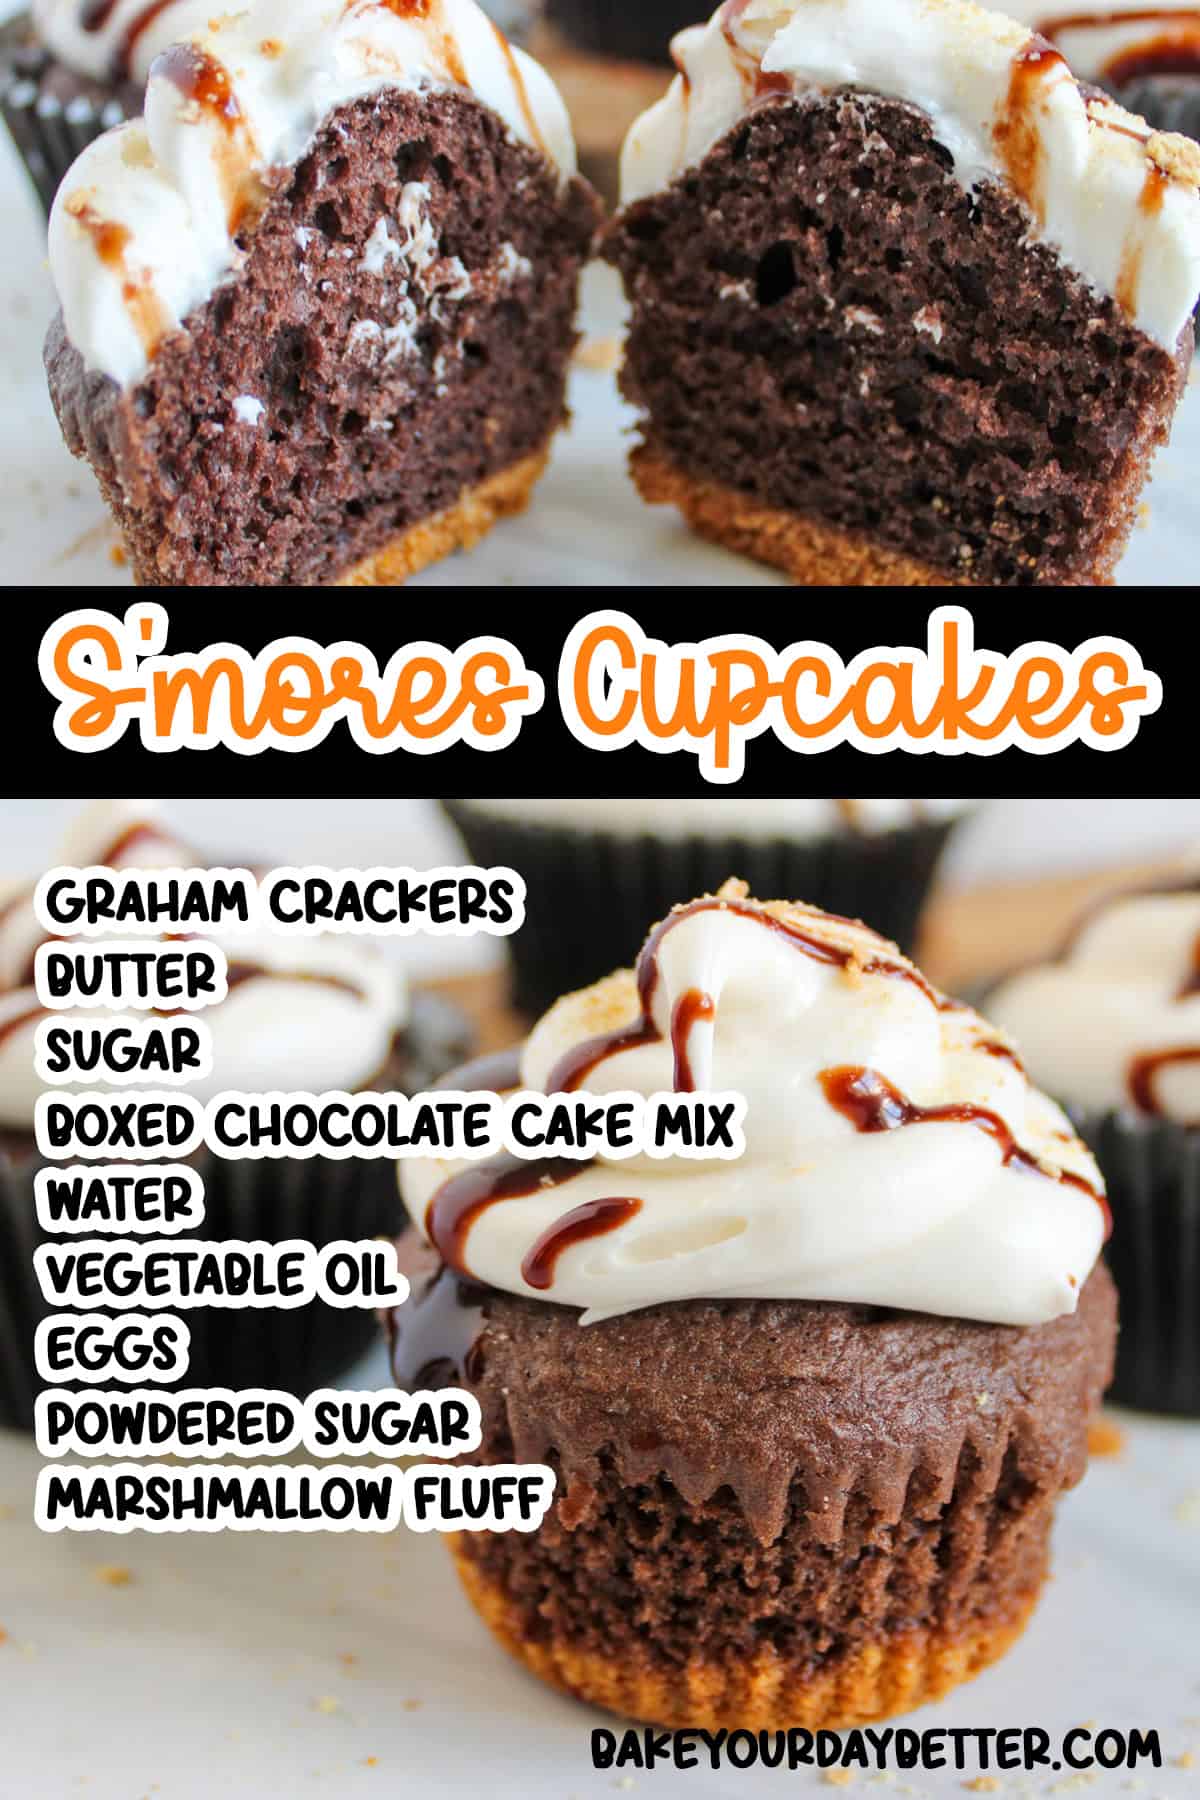 pictures of s'mores cupcakes with text overlay of ingredients list